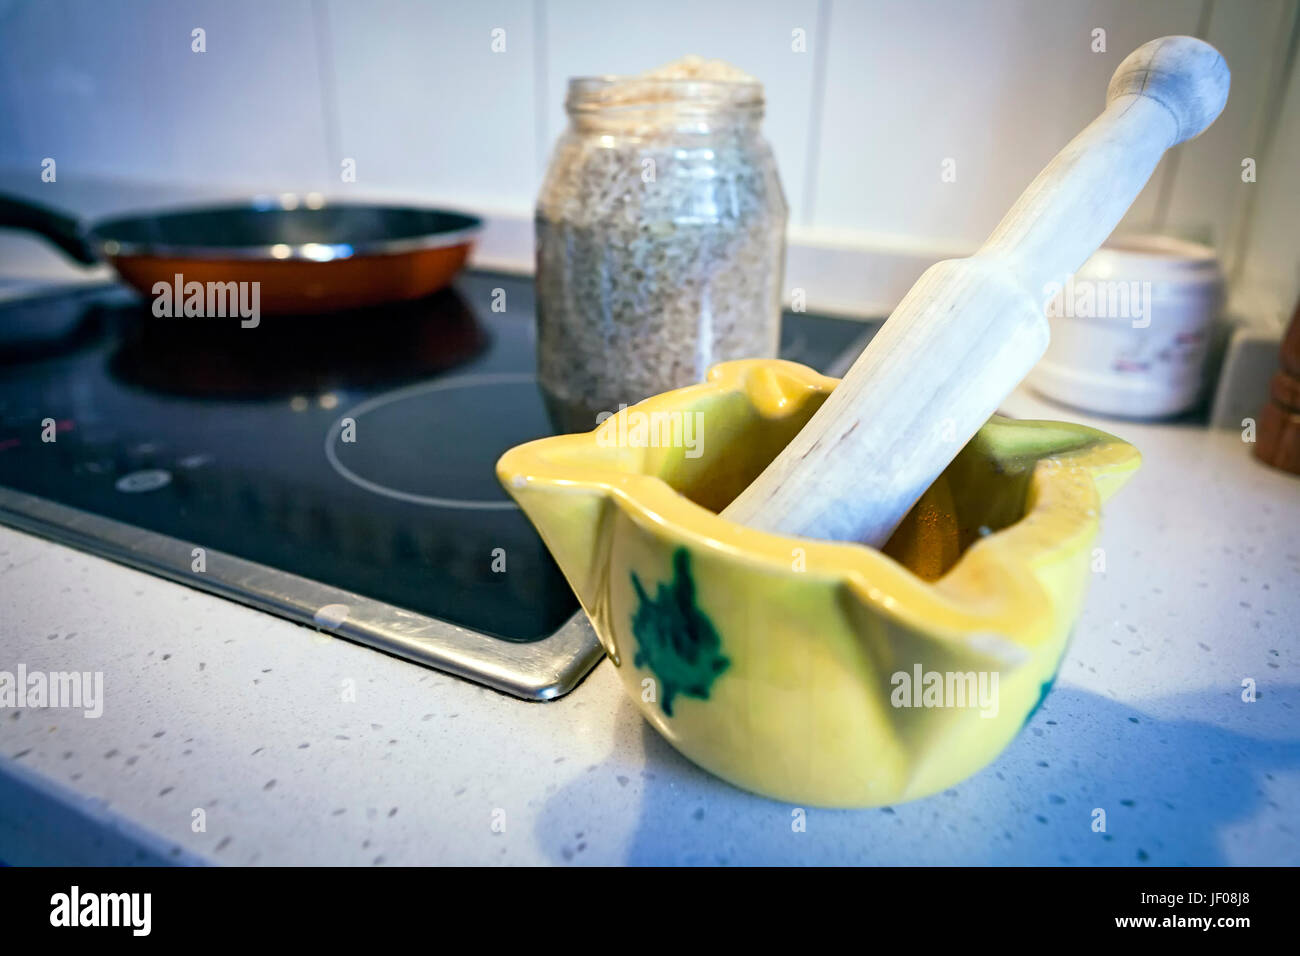 A composition of a ceramic mortar in the kitchen Stock Photo